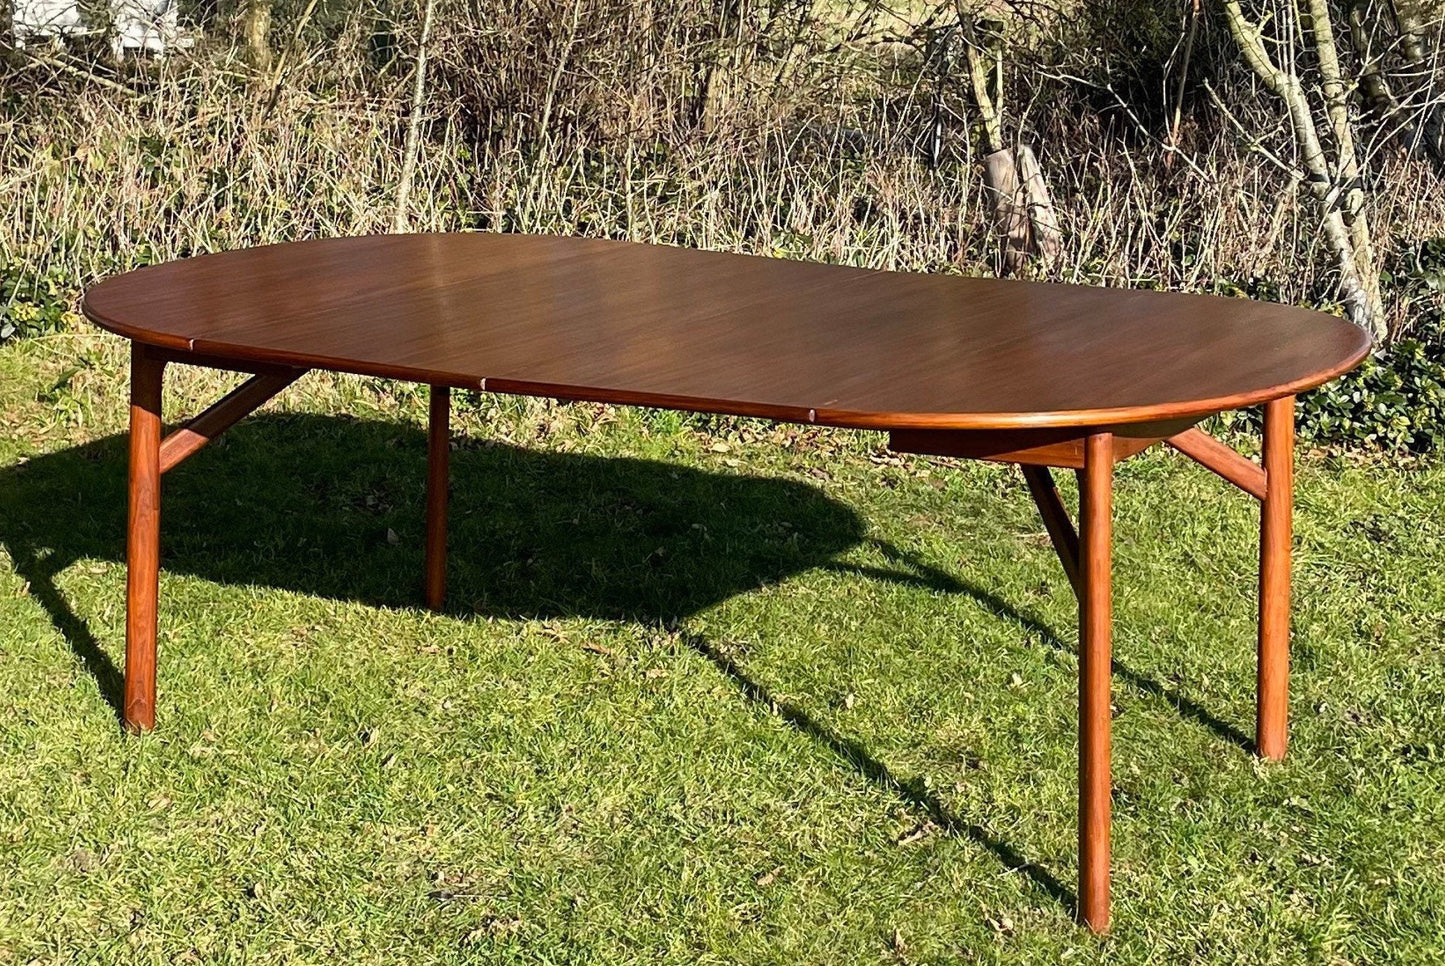 For Robert and Sarah *** Mid Century Danish teak dining table Price includes shipping.